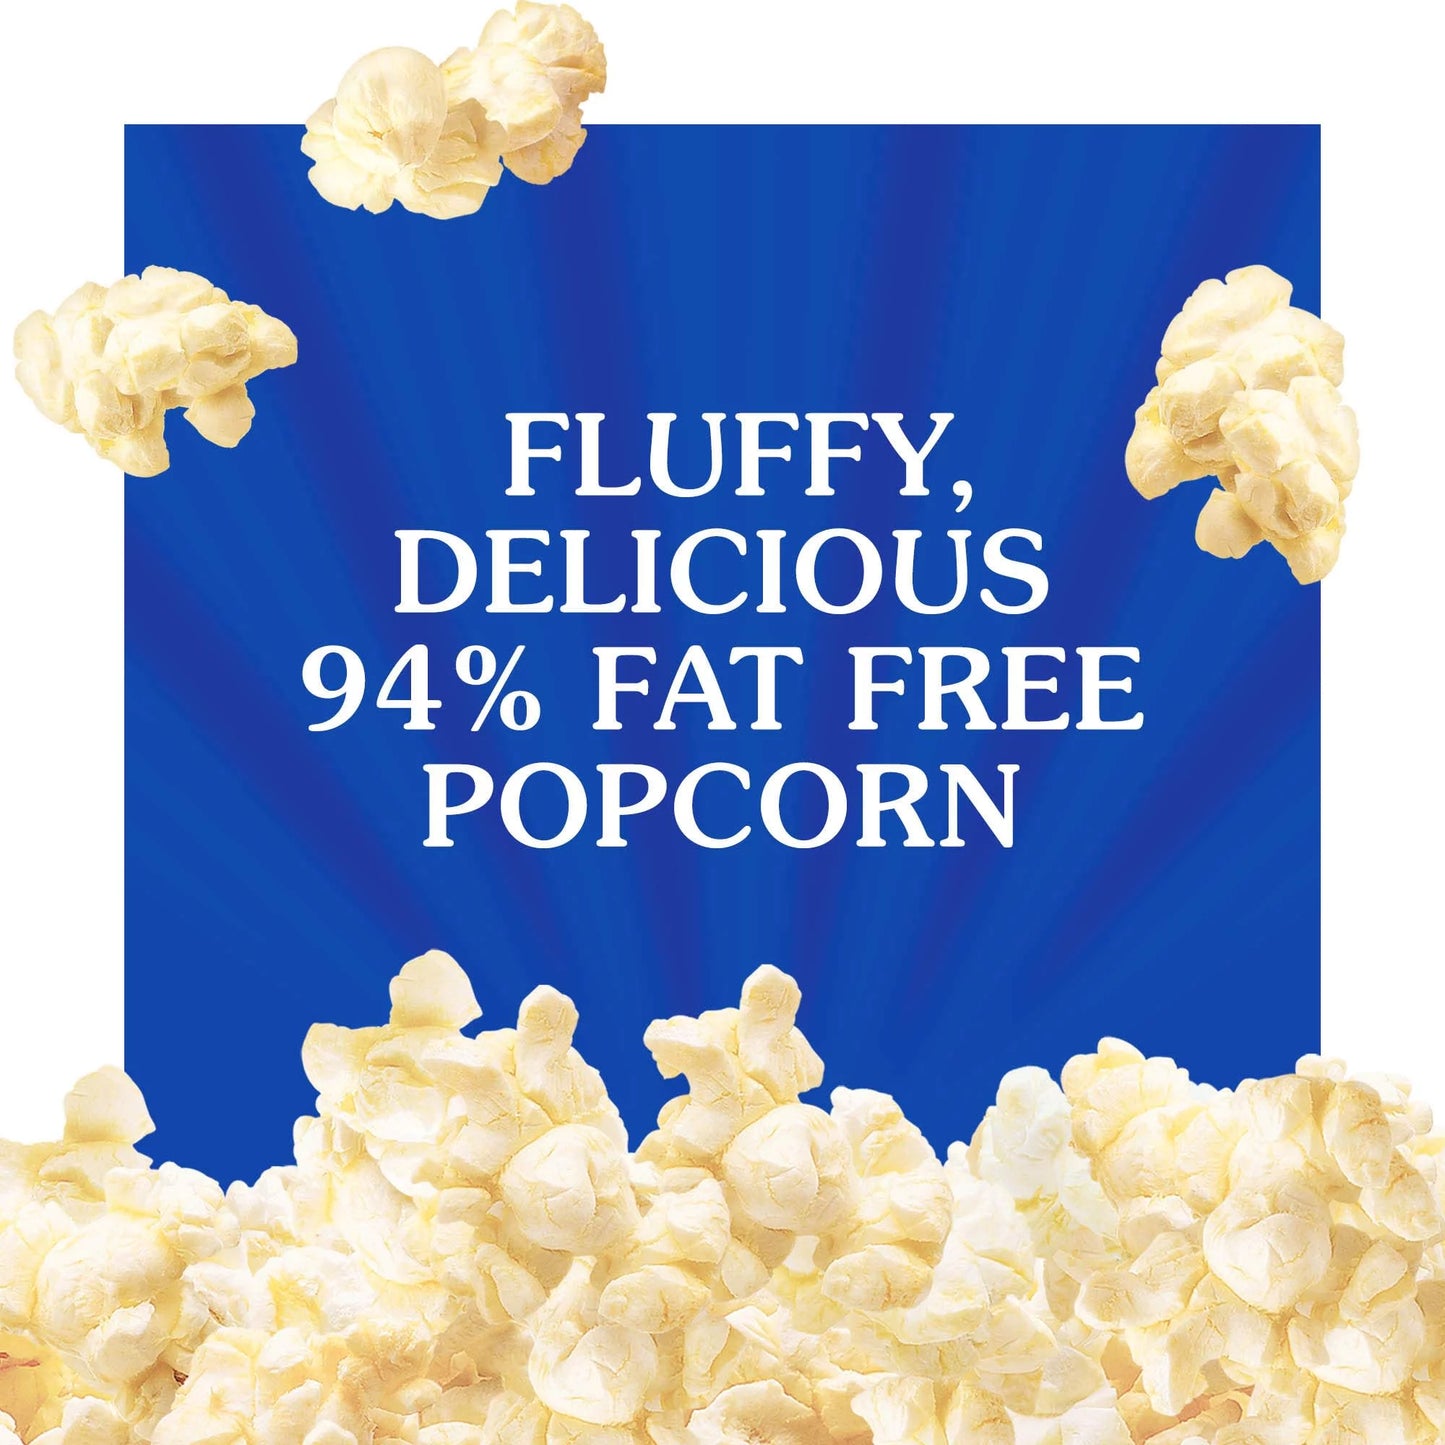 94% Fat-Free Butter Microwave Popcorn, 2.71 Oz, 12 Count